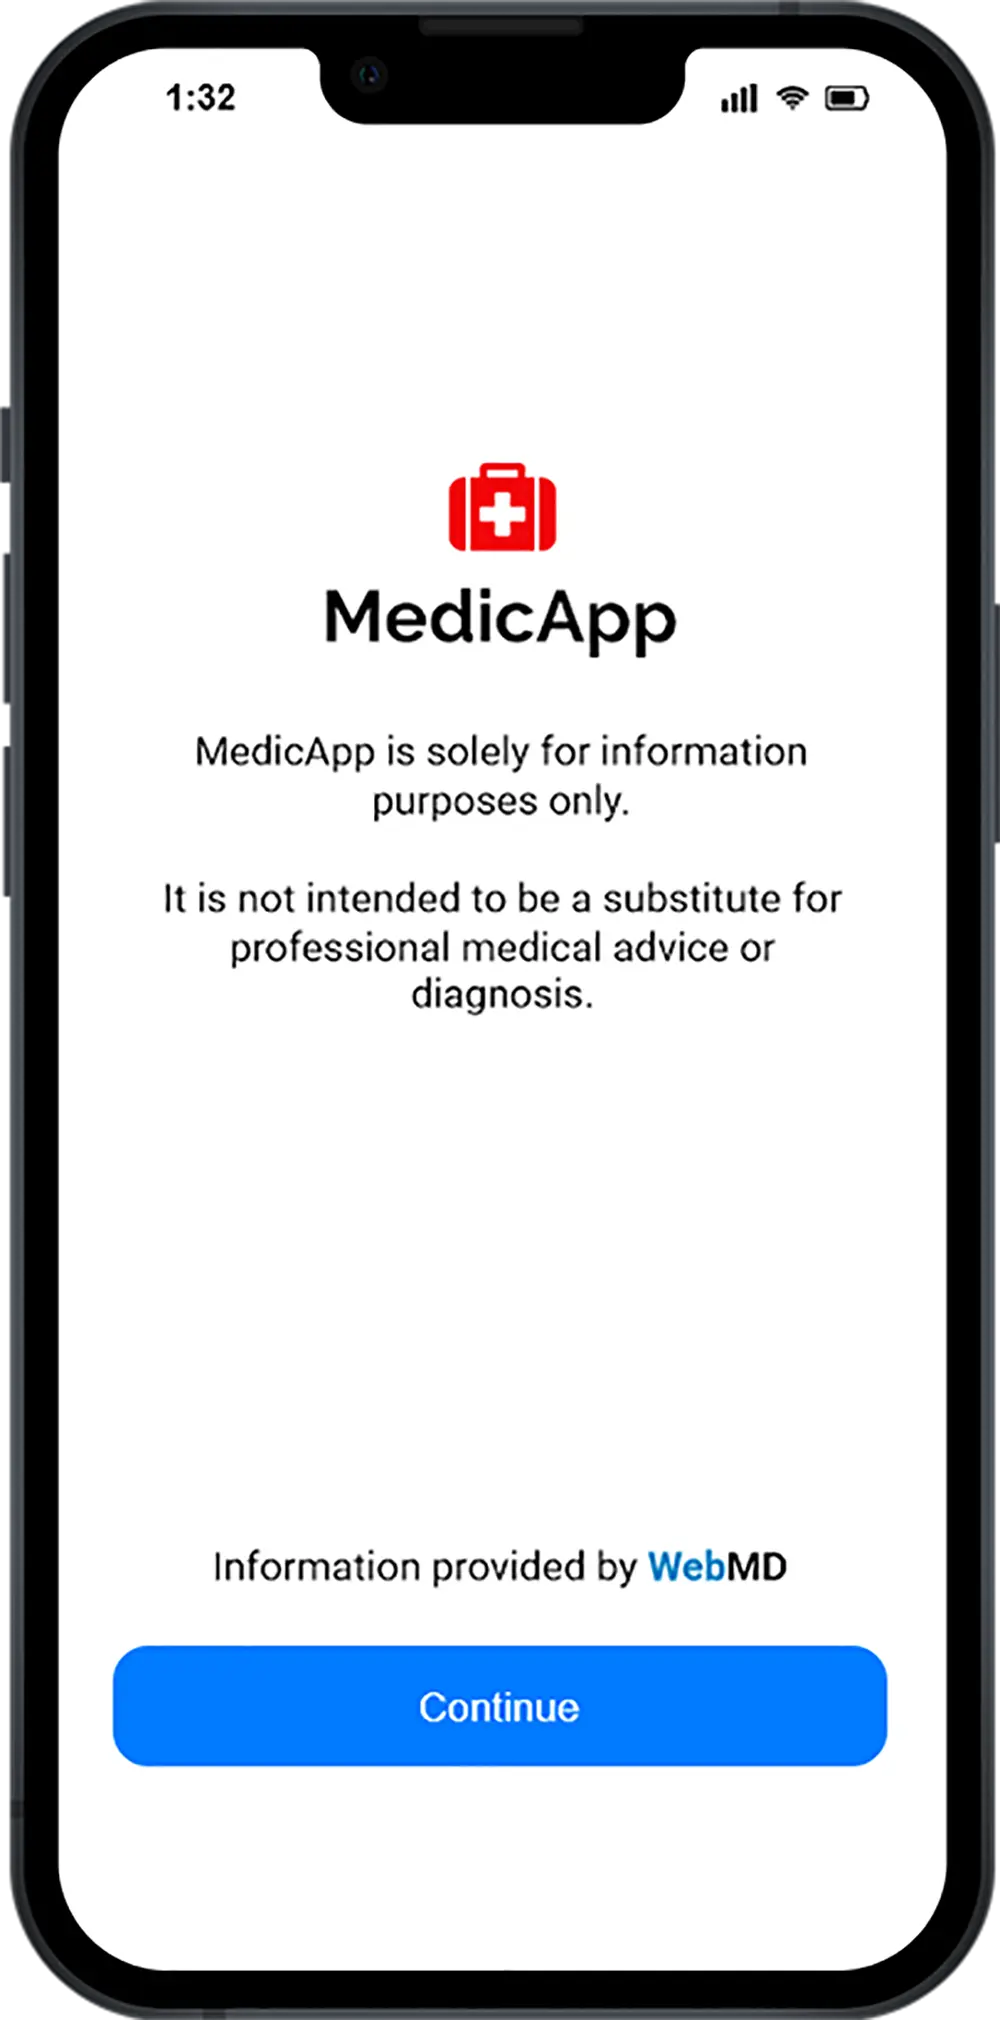 MedicApp start page with a disclaimer and continue button